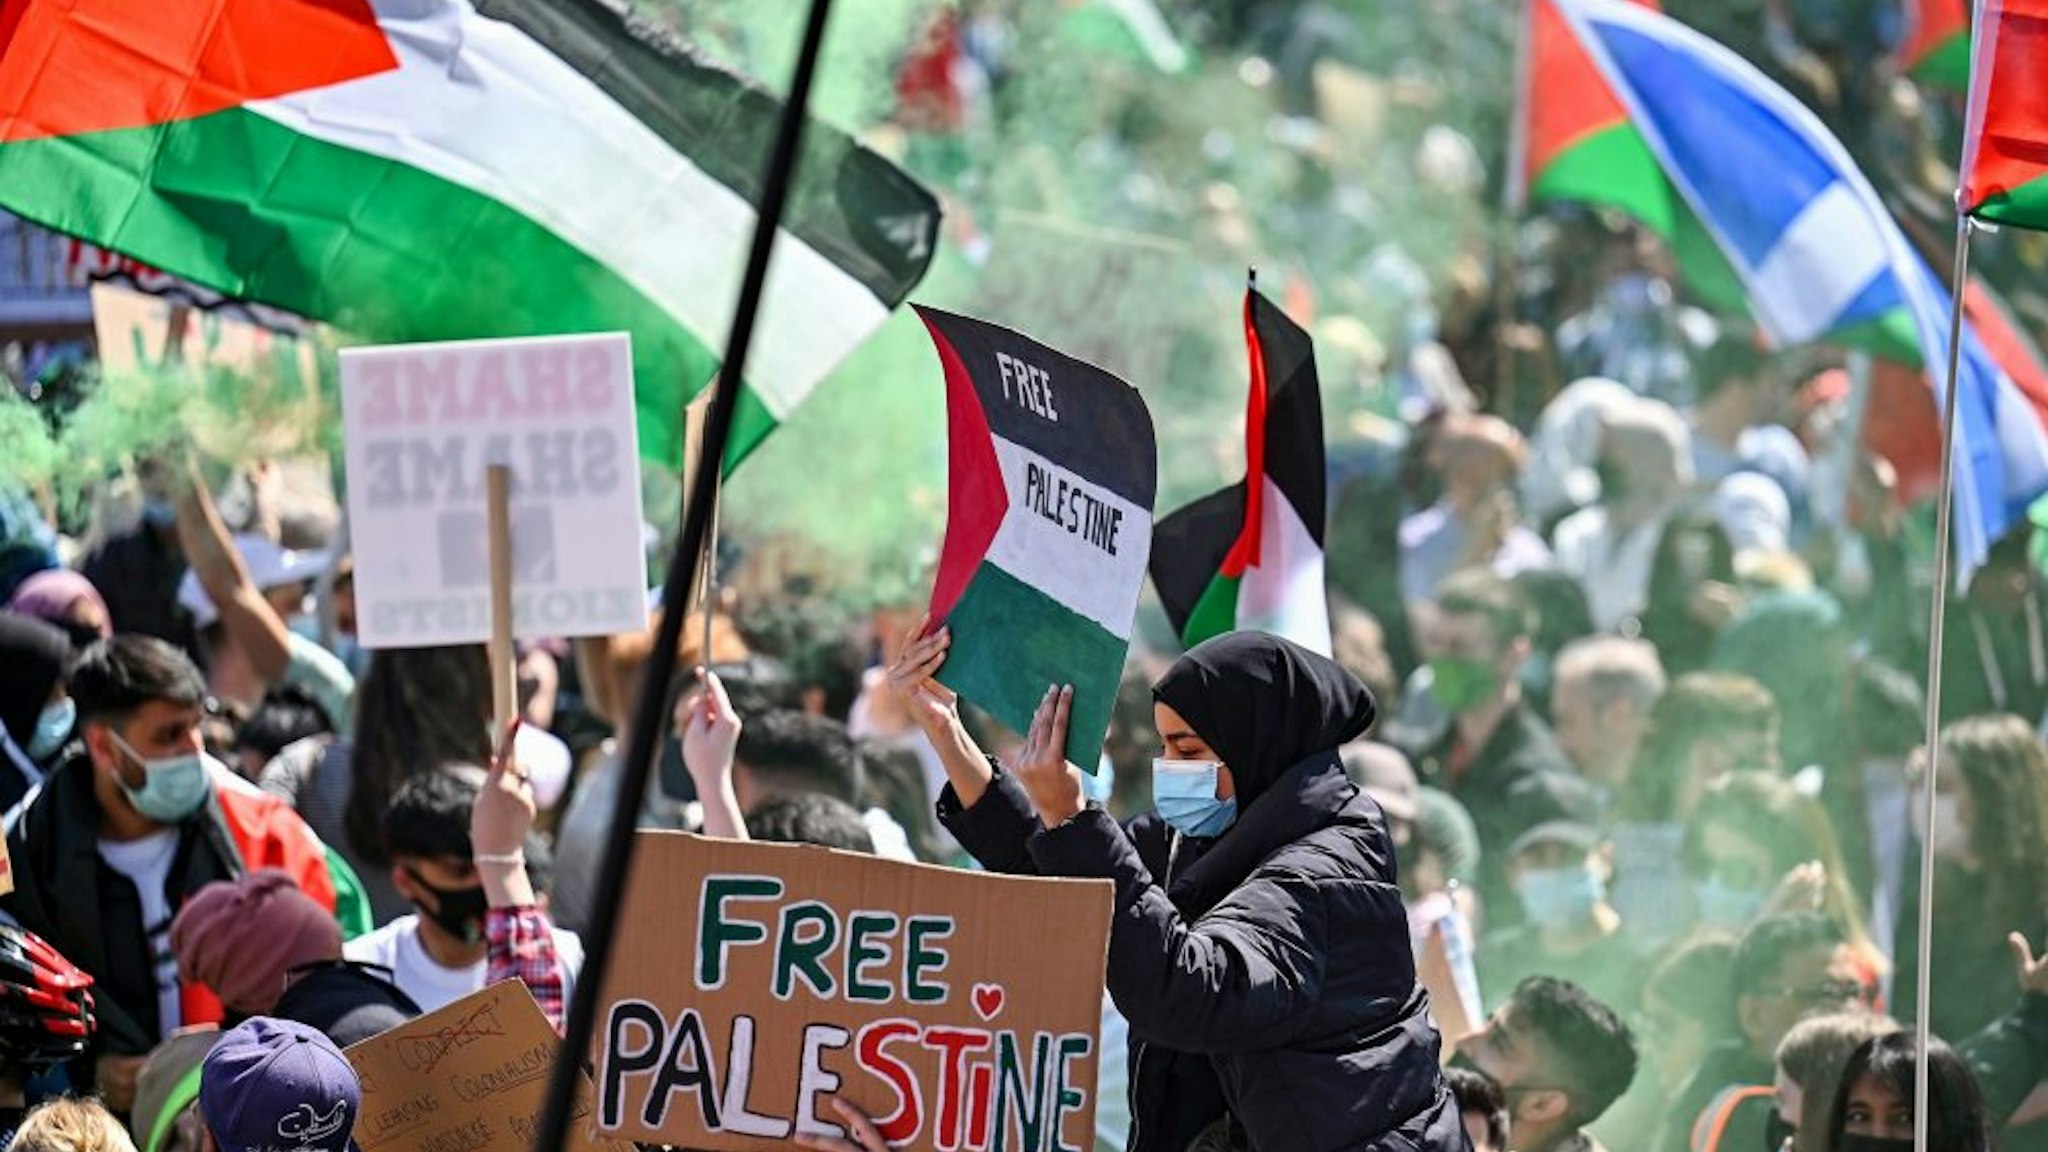 GLASGOW, SCOTLAND - MAY 16: Protestors have gathered in solidarity with the people of Palestine amid ongoing conflict in Gaza on May 16, 2021 in Glasgow, Scotland. The demonstration comes amid spiraling violence in Israel and Palestine and after yesterday's Palestinian Nakba (Catastrophe) Day, which commemorates the expulsion of Arabs from their homes in the 1948 war that forged modern Israel.